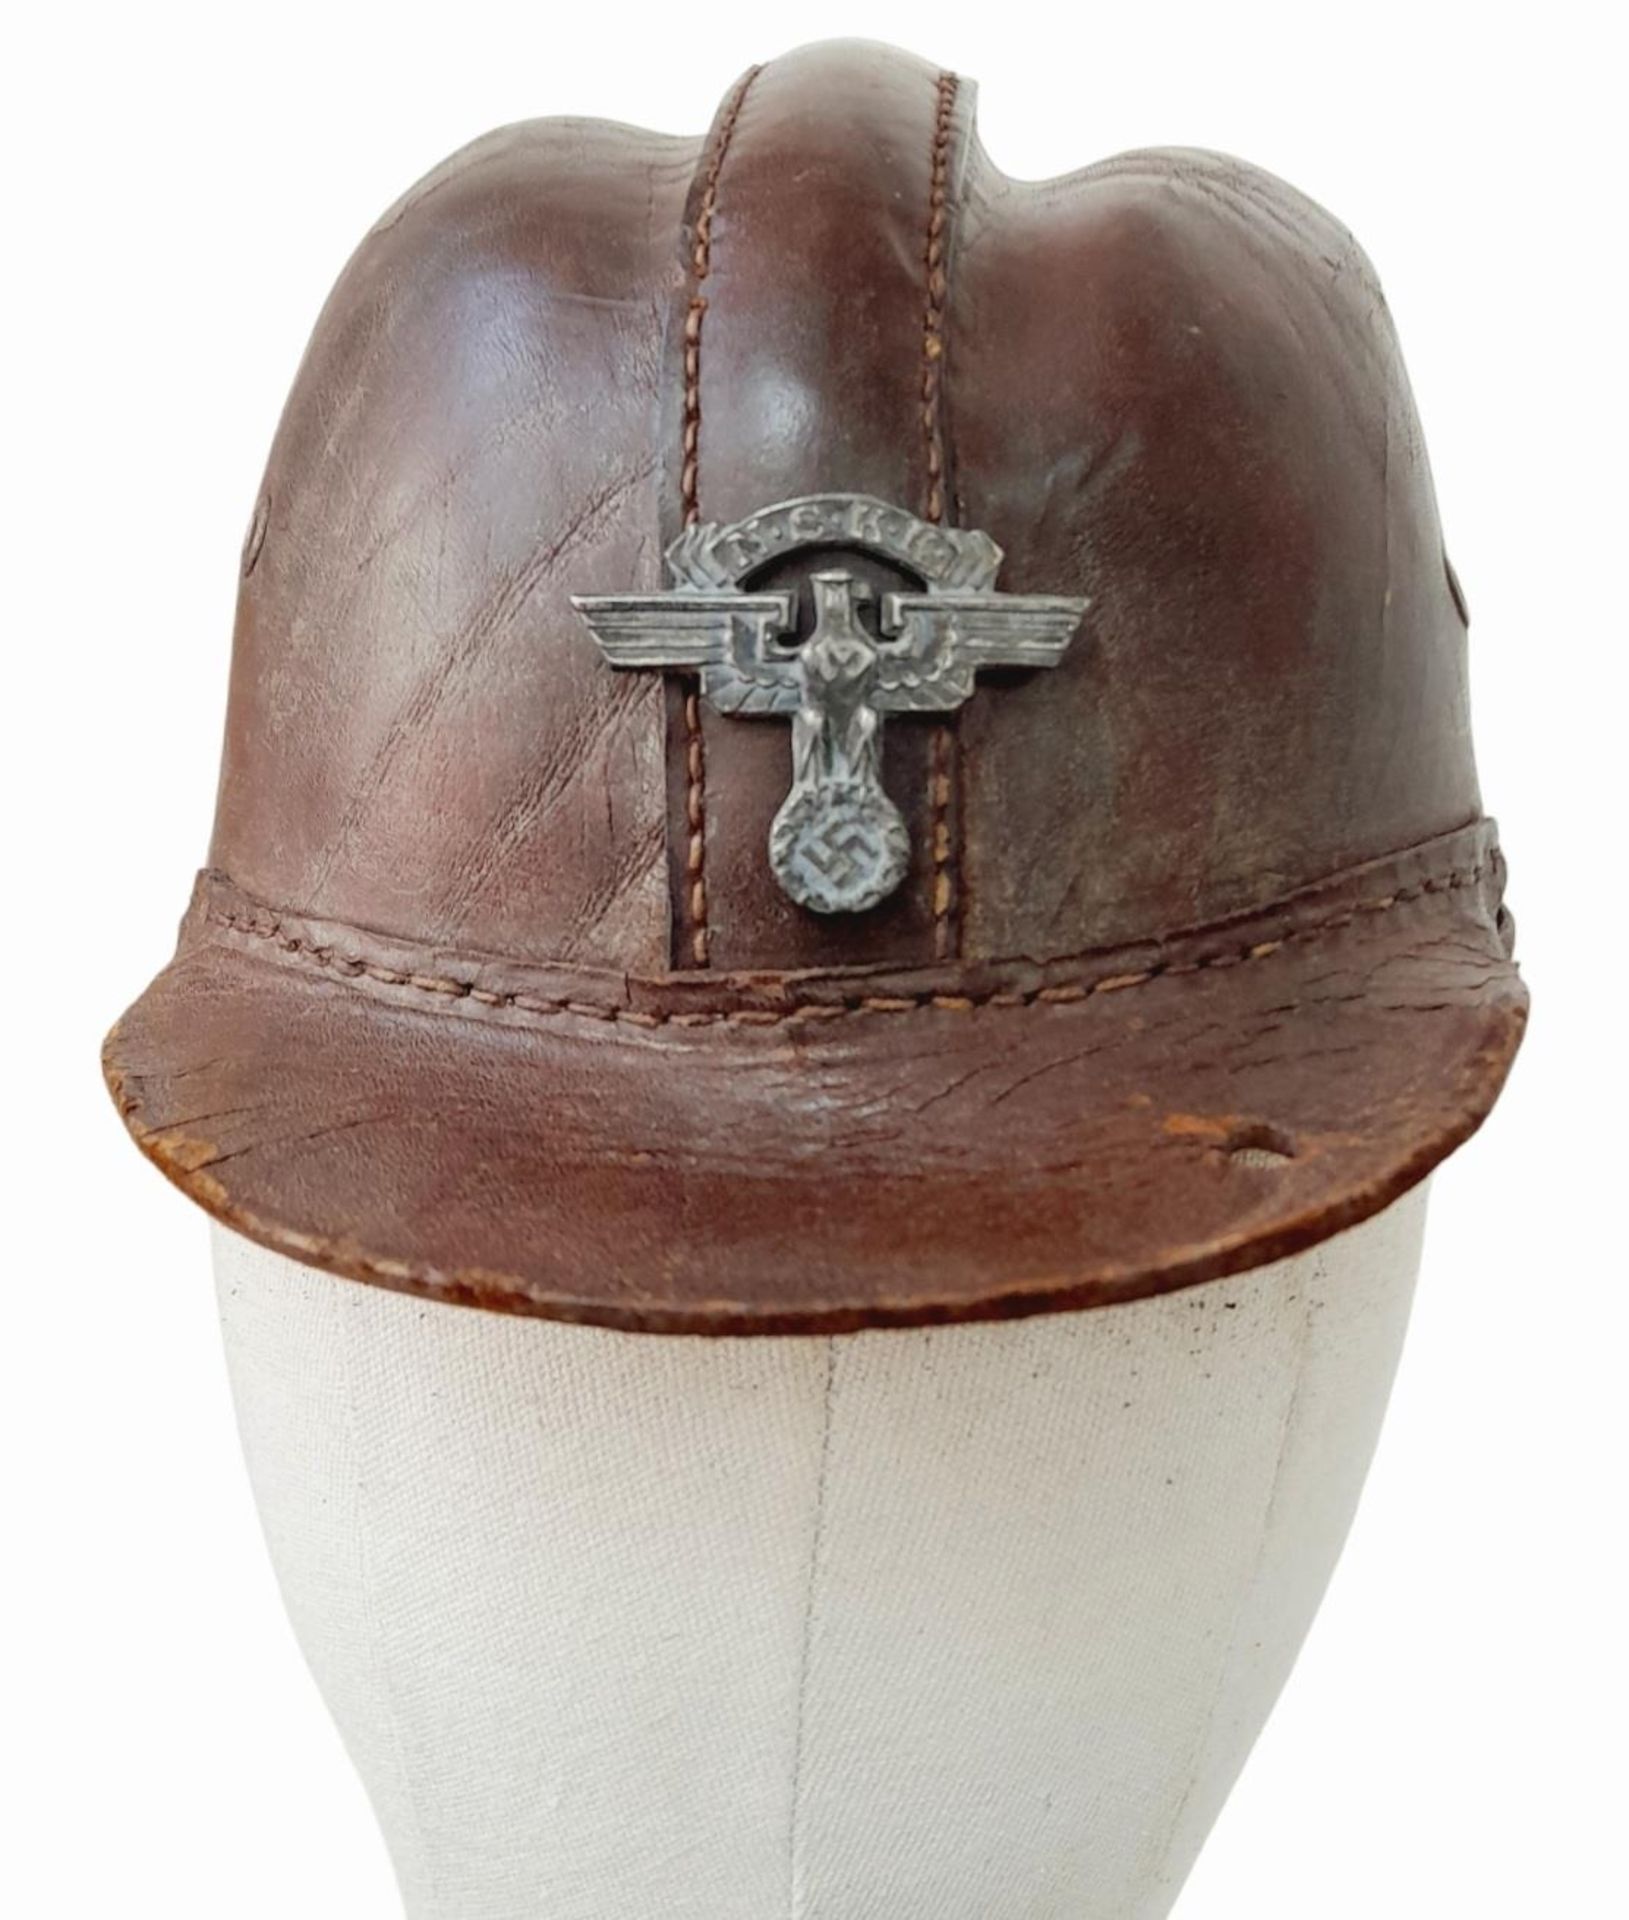 Early 1930’s German Motorcycle Crash Helmet and liner with an NSKK Badge on the front.